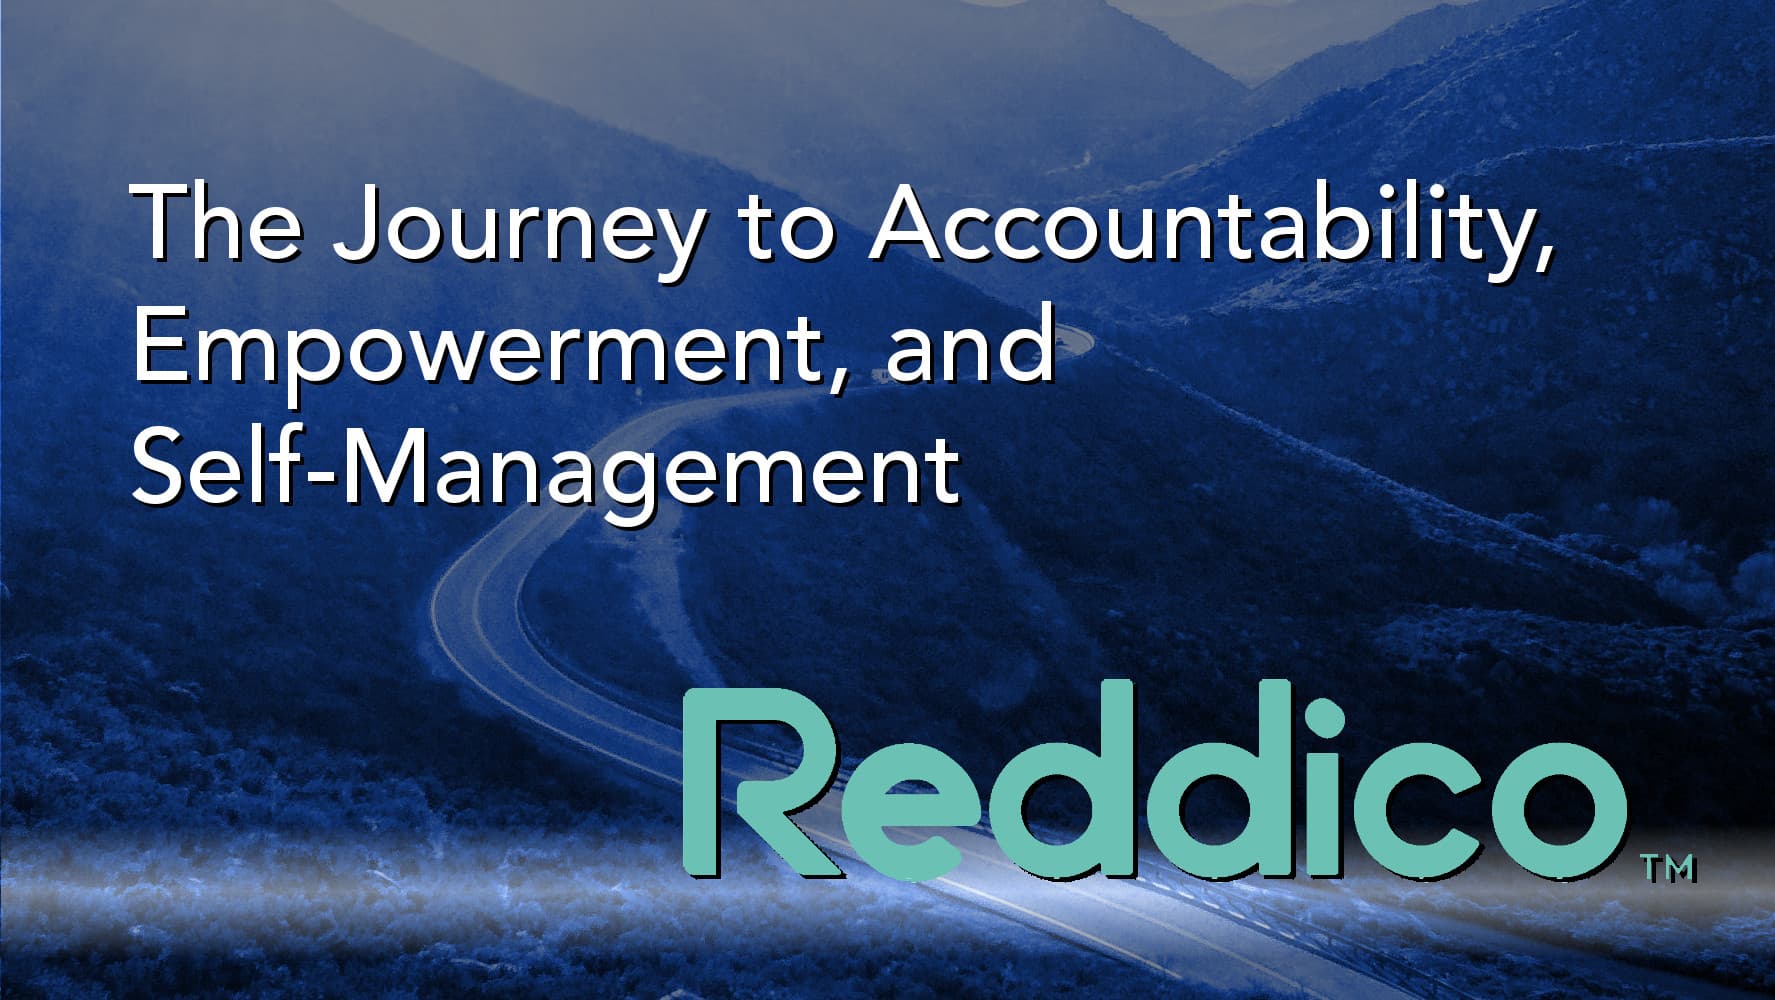 The Journey to Accountability, Empowerment, and Self-Management